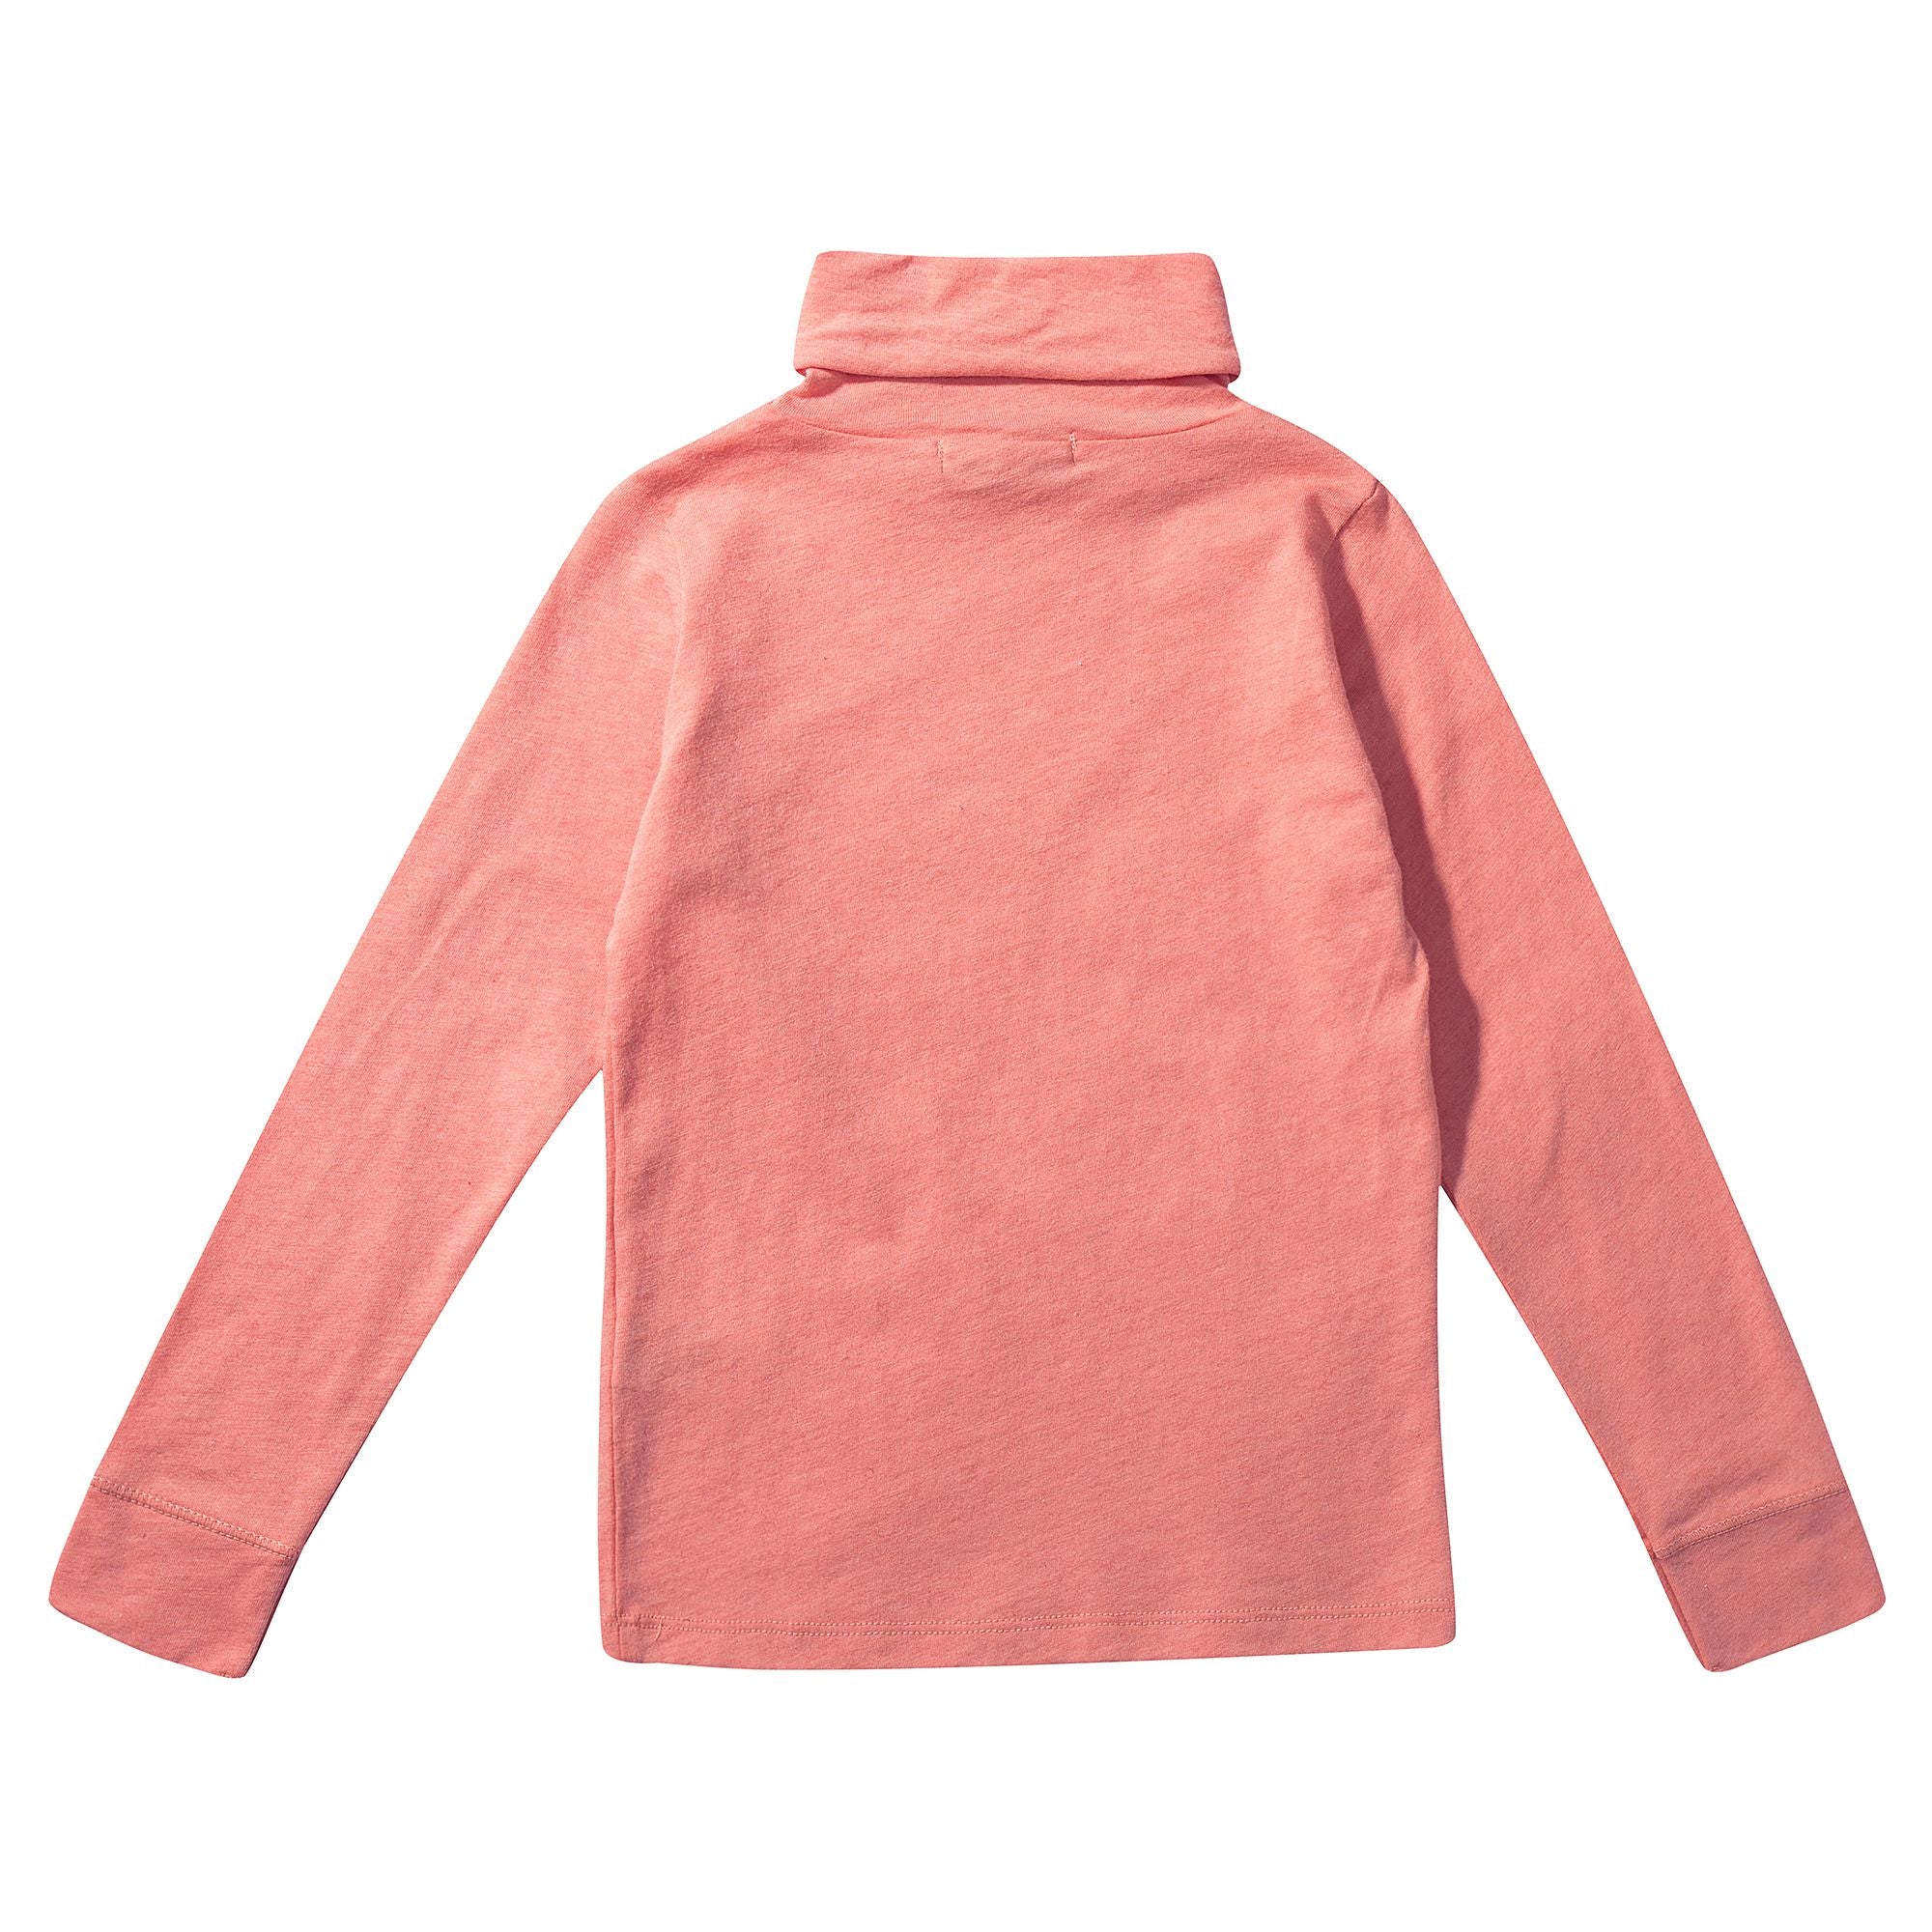 Girls Coral Pink Jersey Top